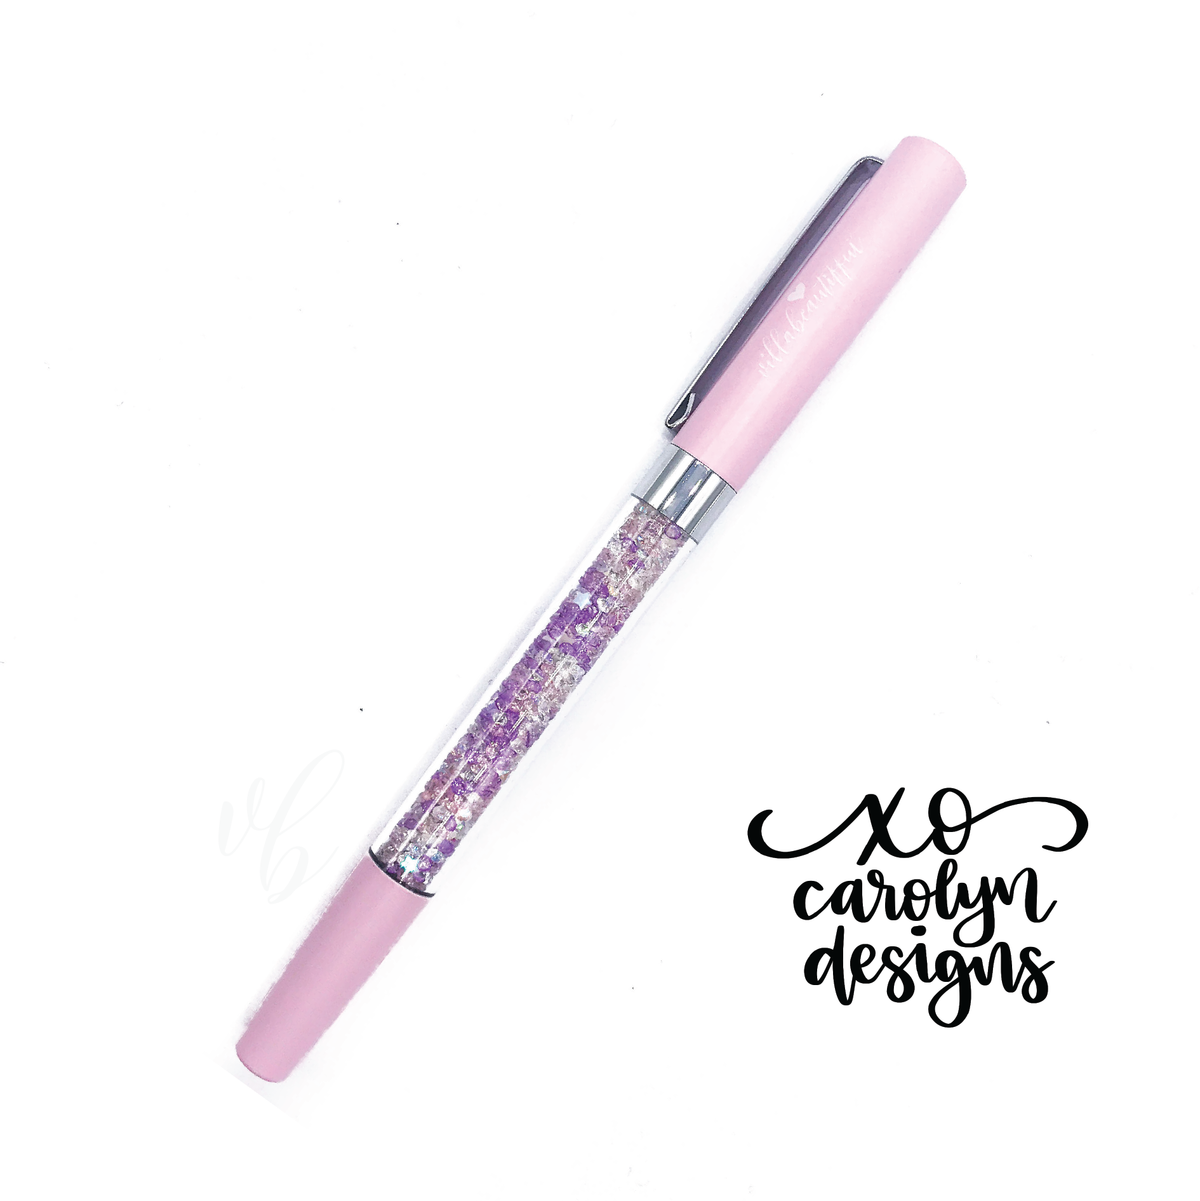 Stardust Imperfect Crystal VBPen | limited pen